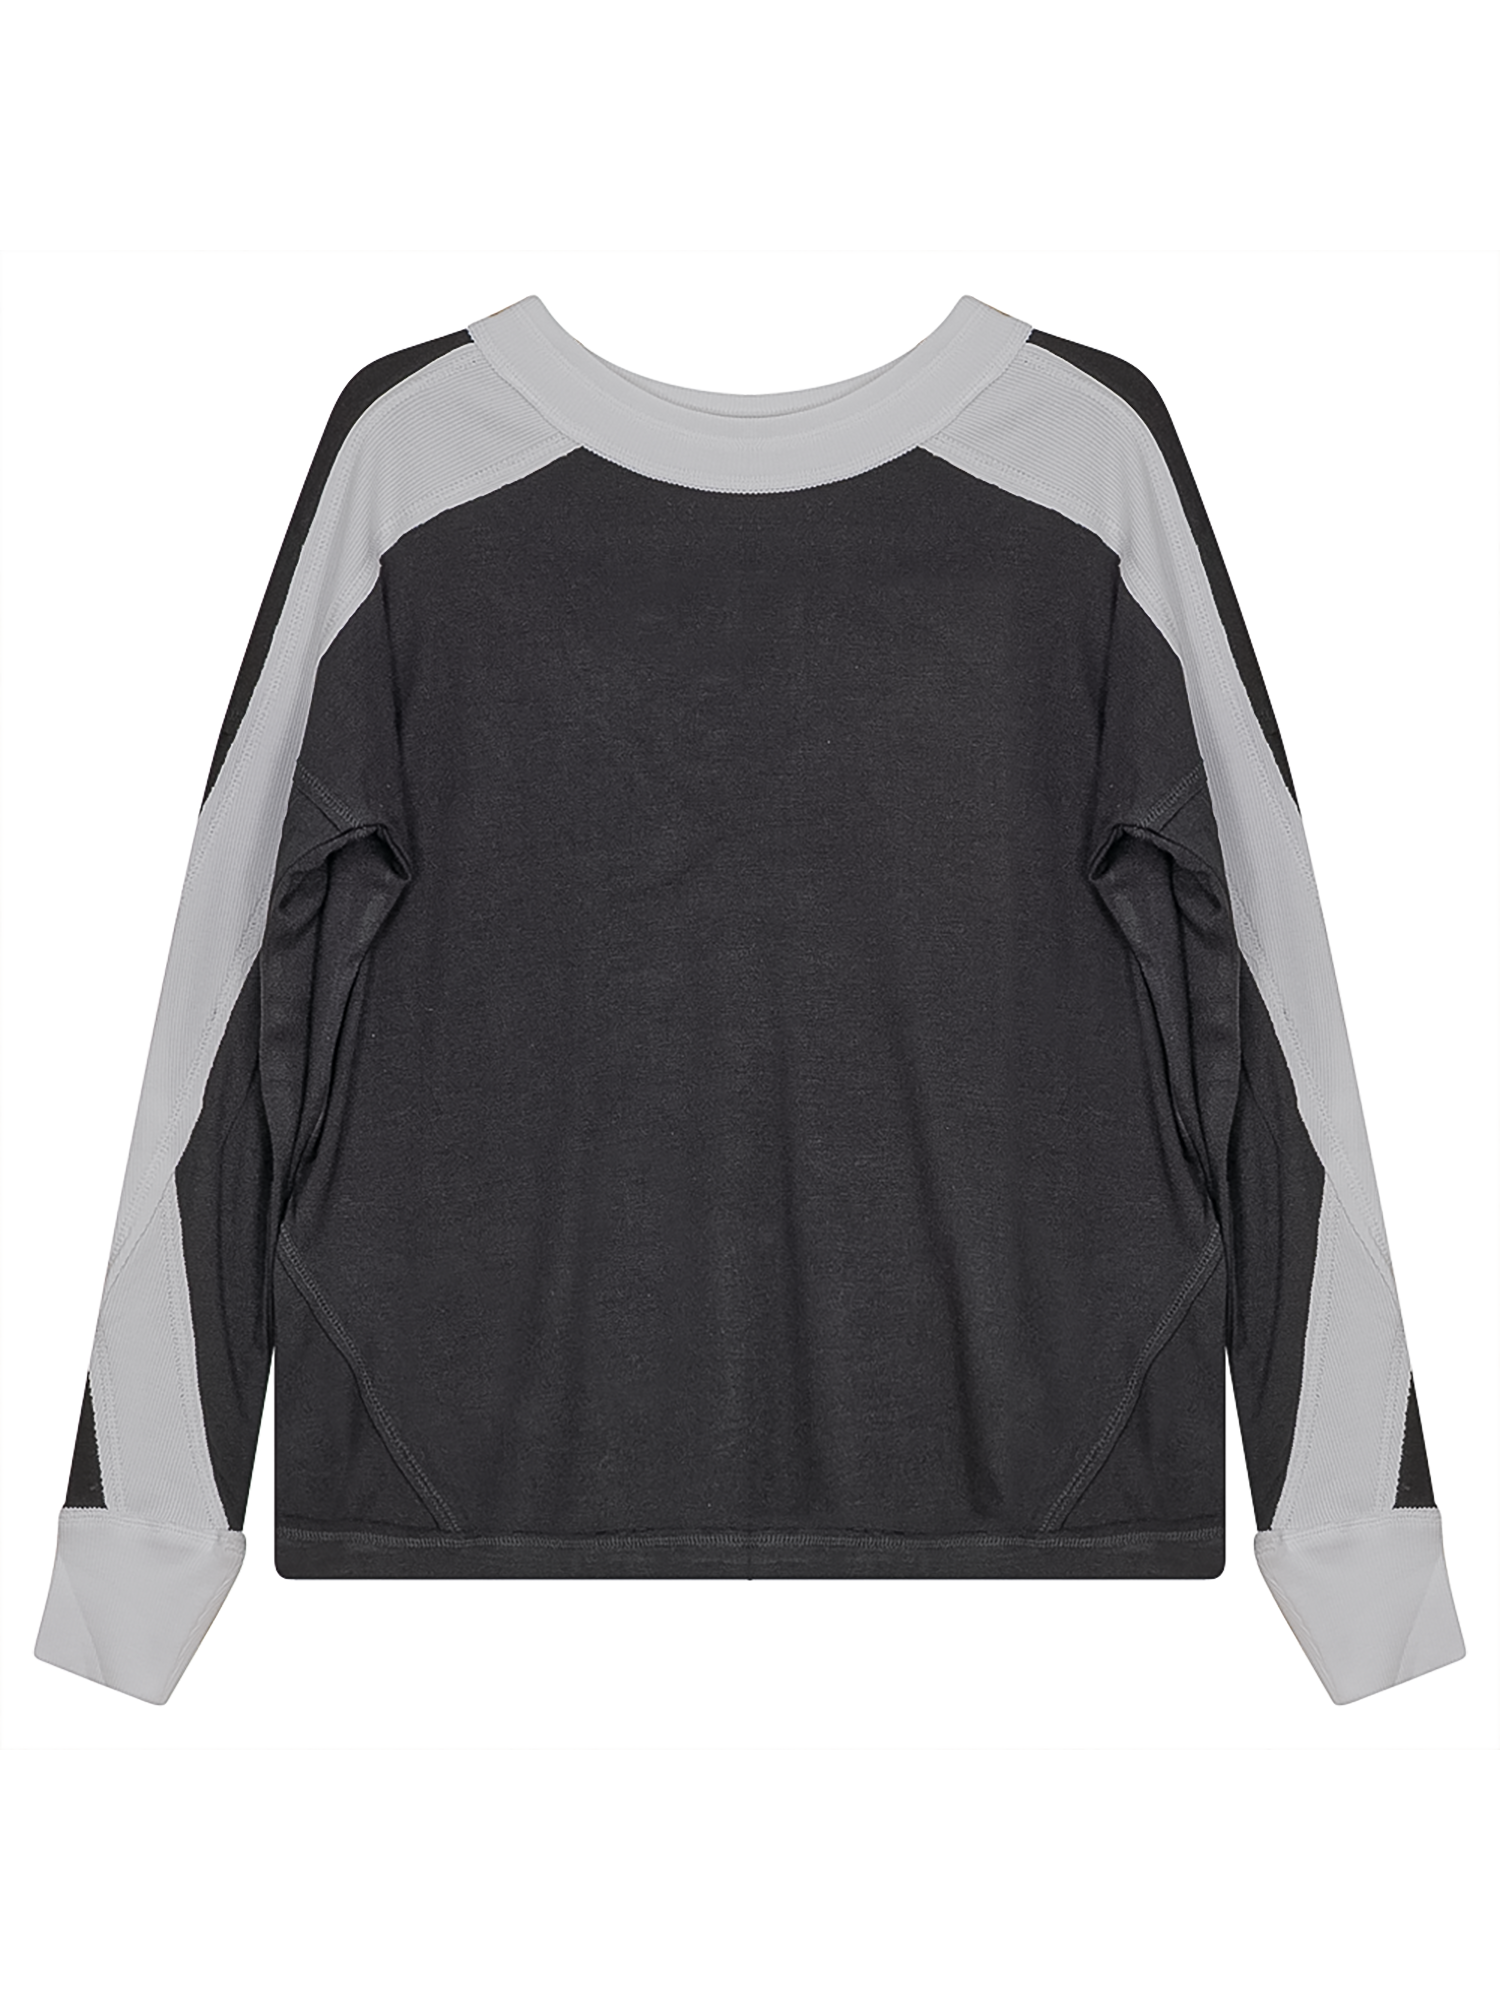 Unclear Contrast Rib Top - Tops